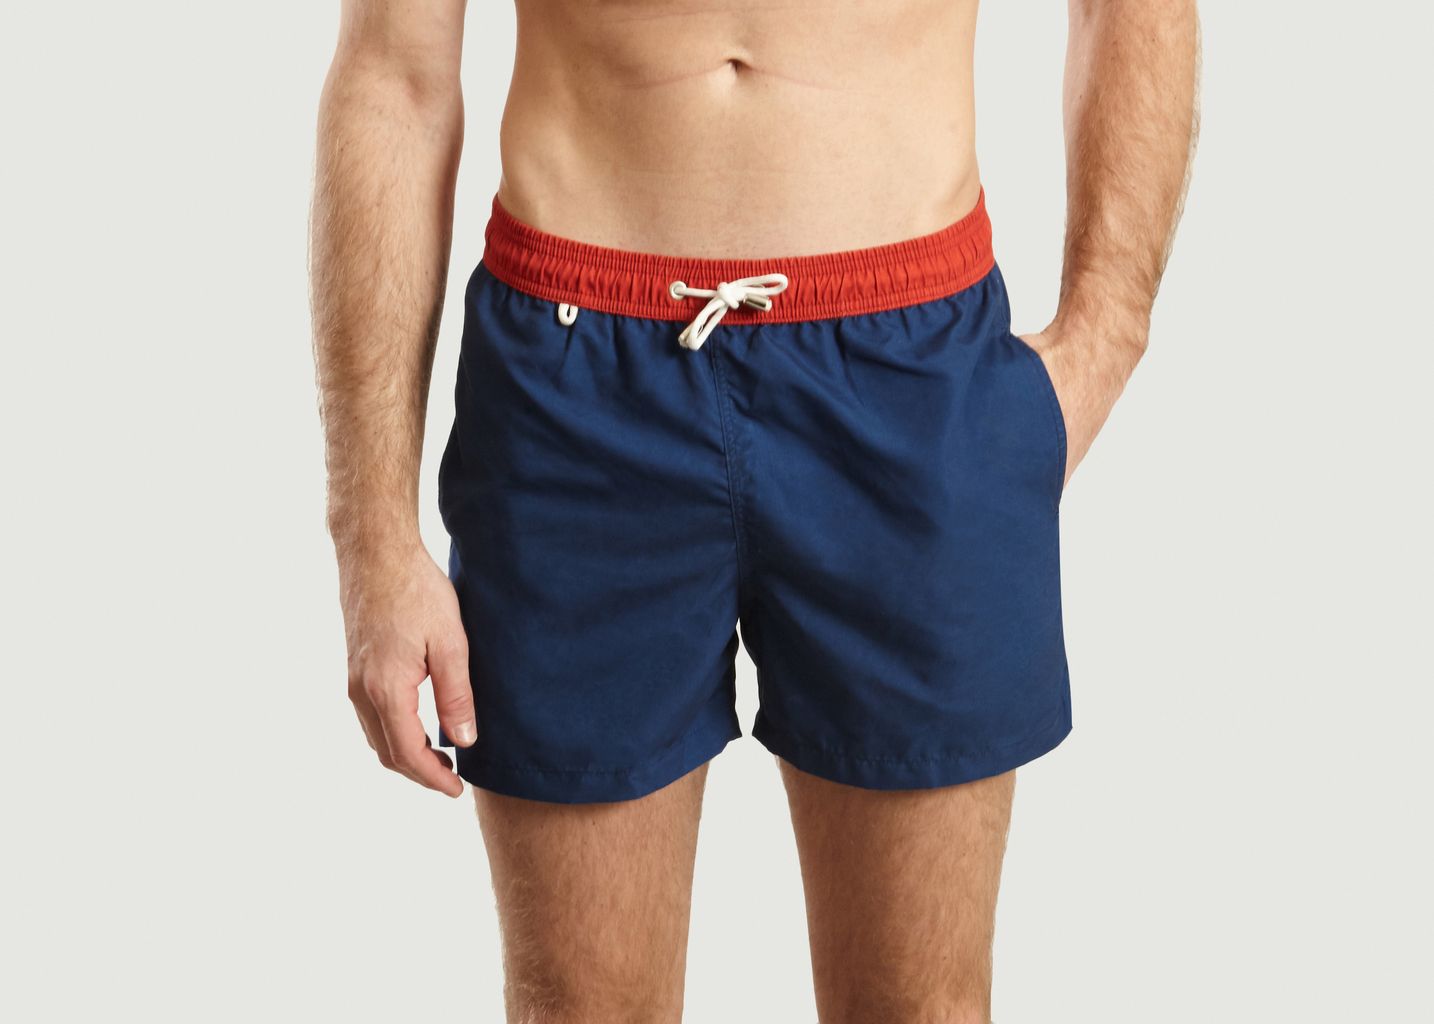 Frenchy swimming trunks - Surprise